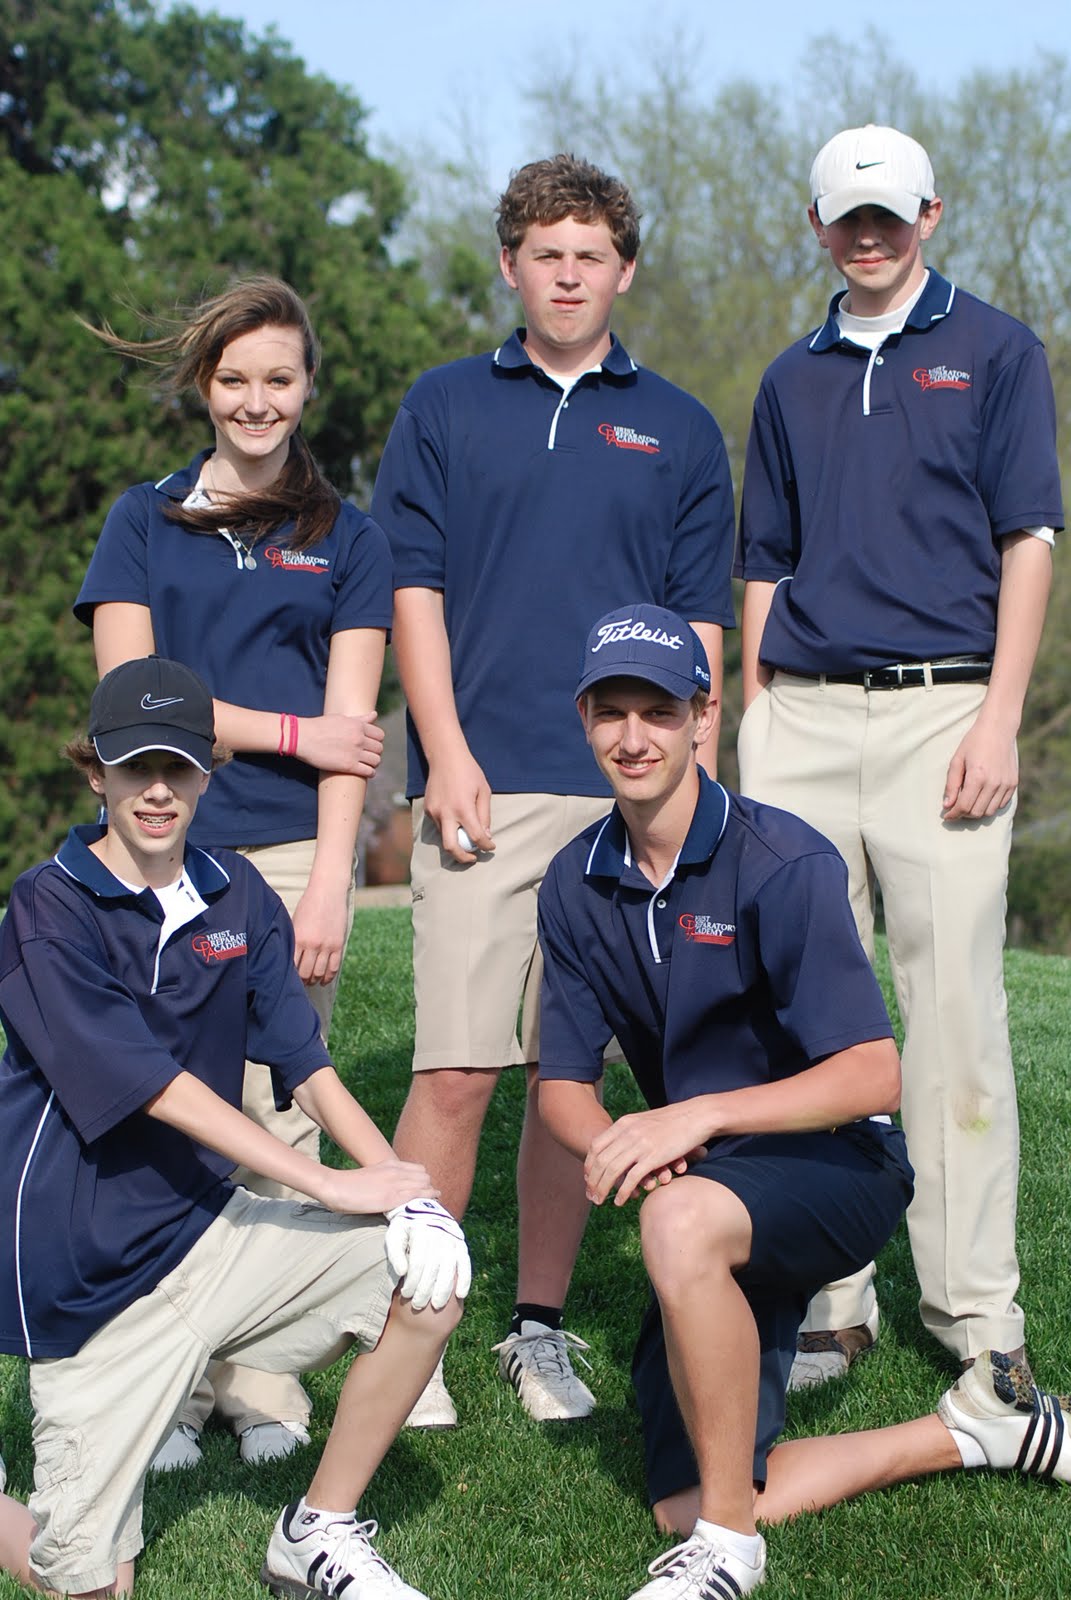 The blue team was comprised of (left to right) Jacob Bishoff, Sierra Massing, Timothy Finley, Adam Johnson, and Logan Routh.